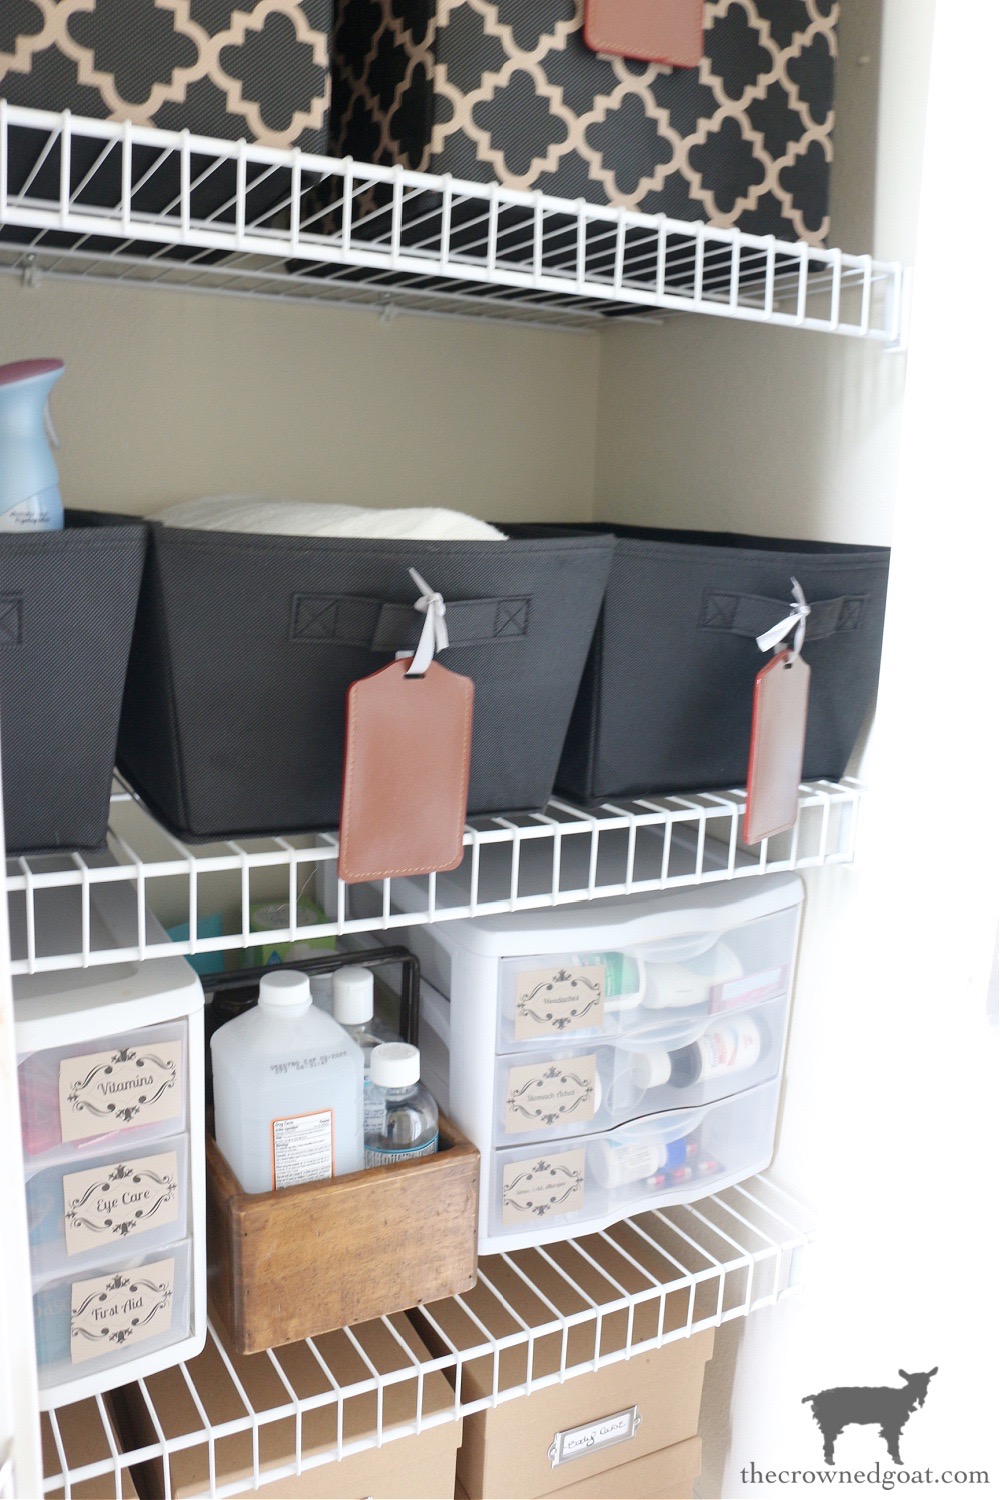 TIps and Tricks for Small Linen Closet Organization-The Crowned Goat